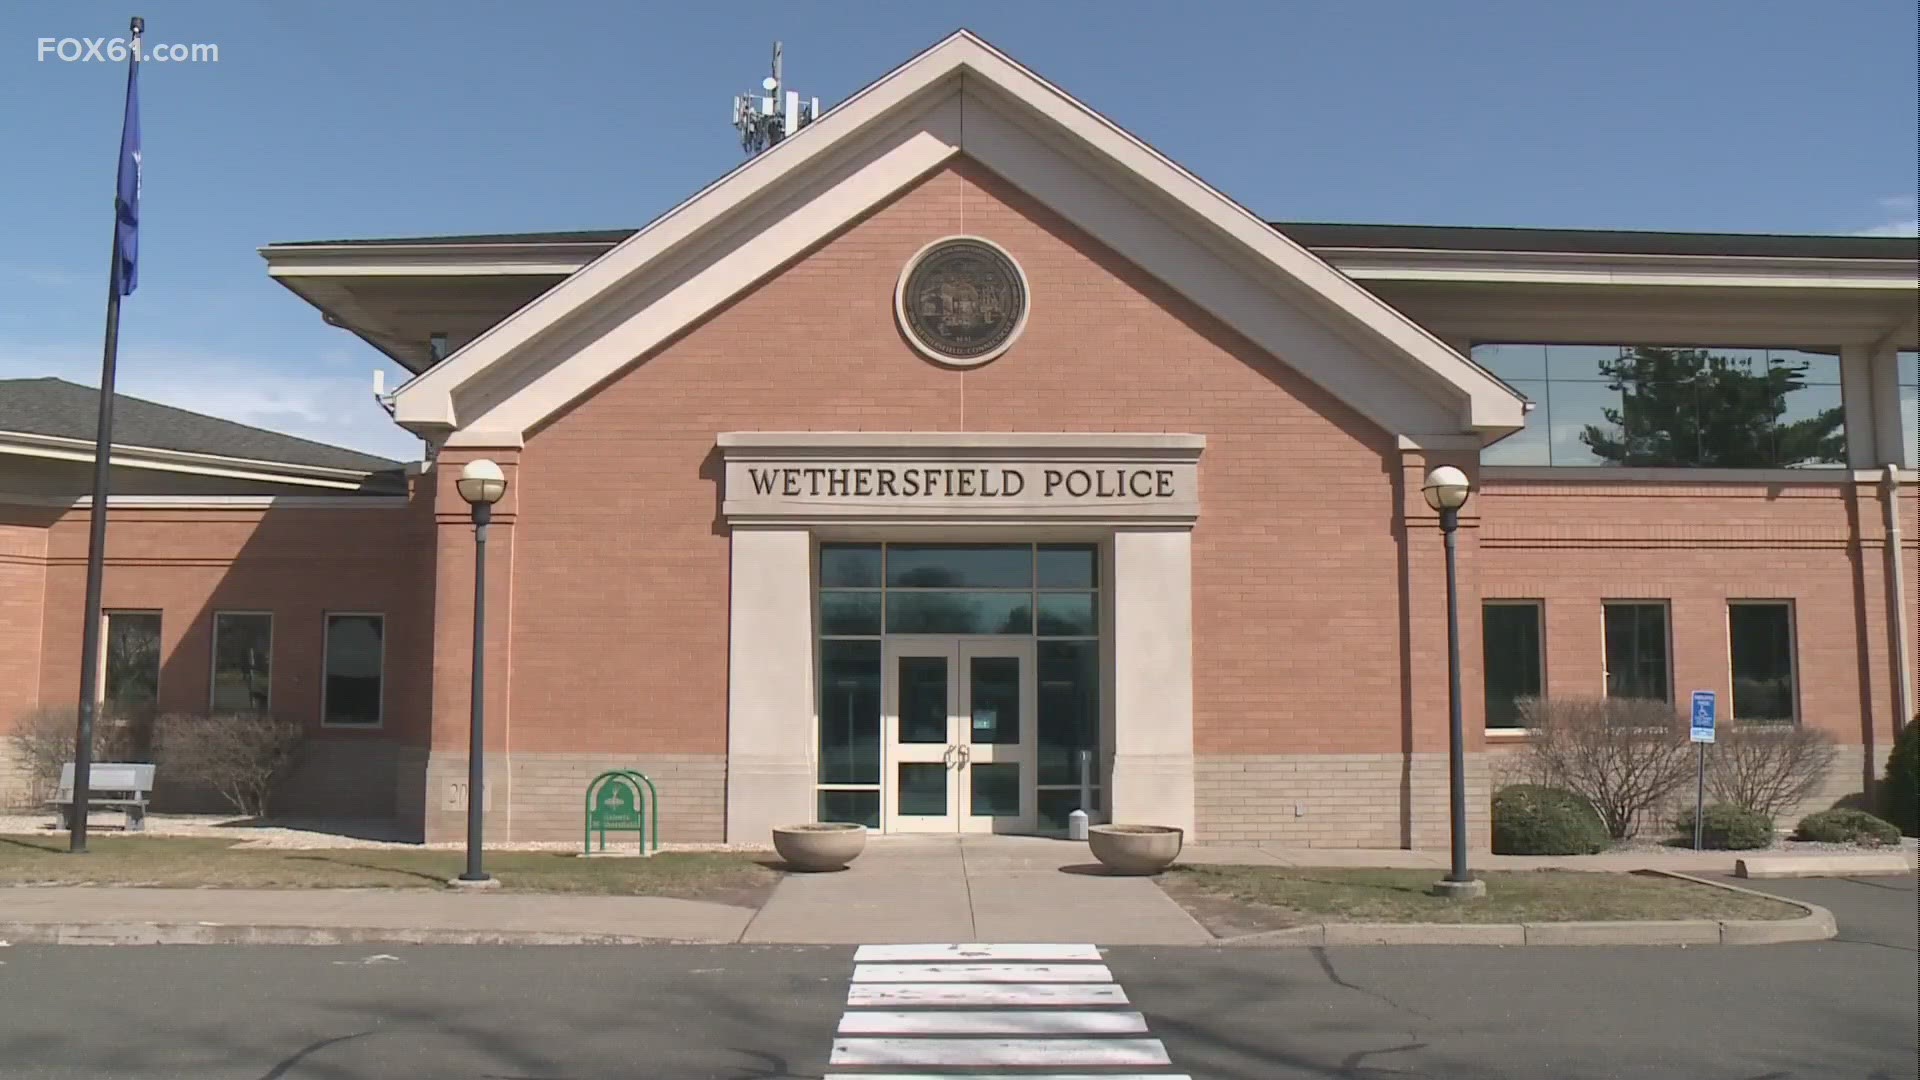 A report has been released that severely criticizes practices at the Wethersfield Police Department under the former chief, describing a culture of favoritism, unequ